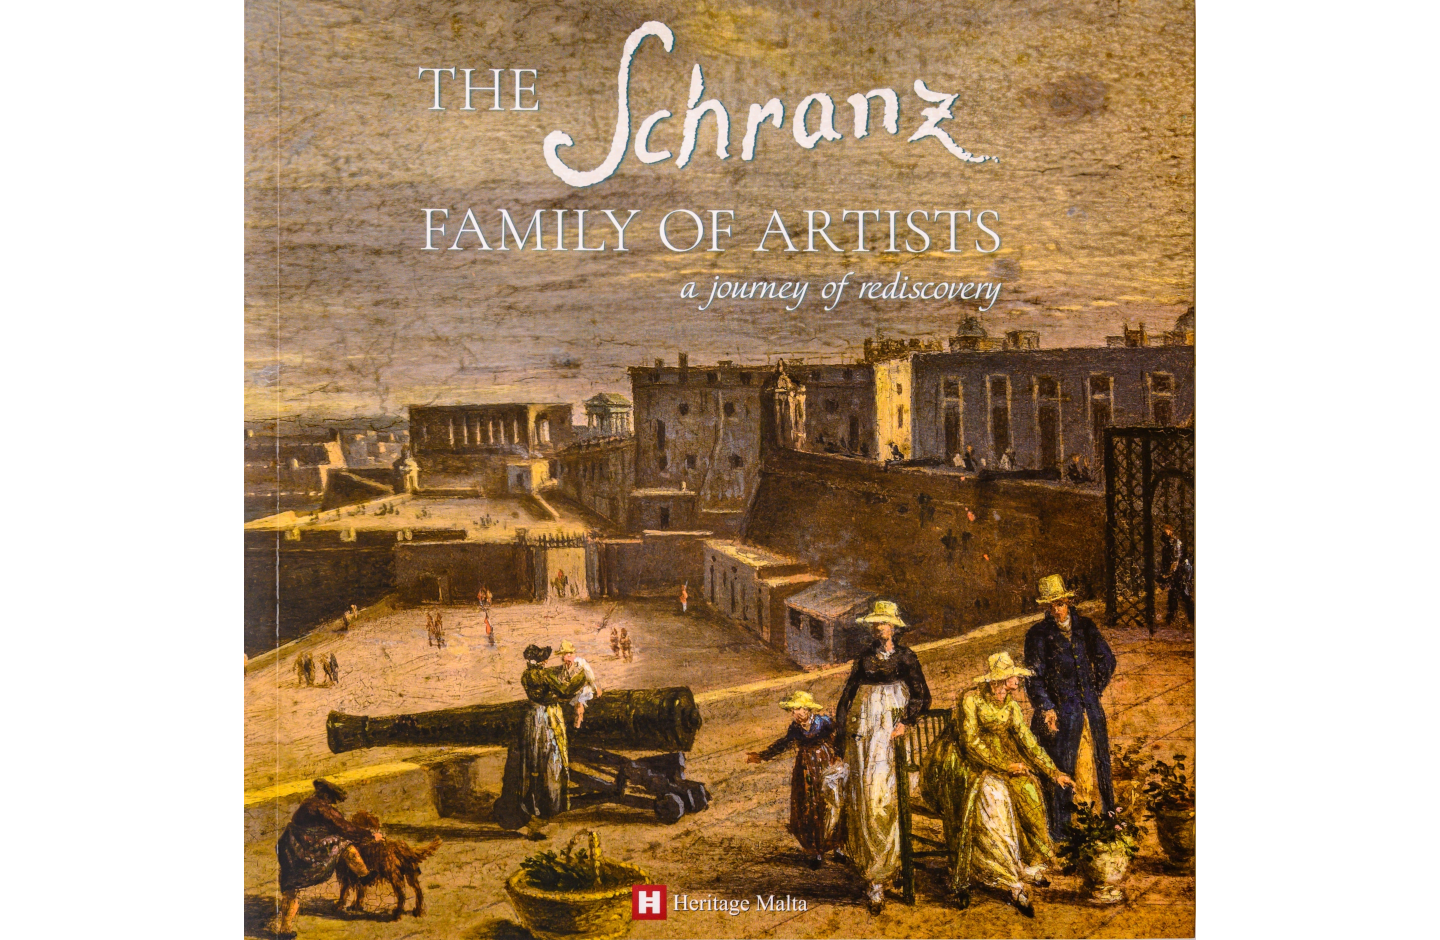 The Schranz Family of Artists – A journey of rediscovery